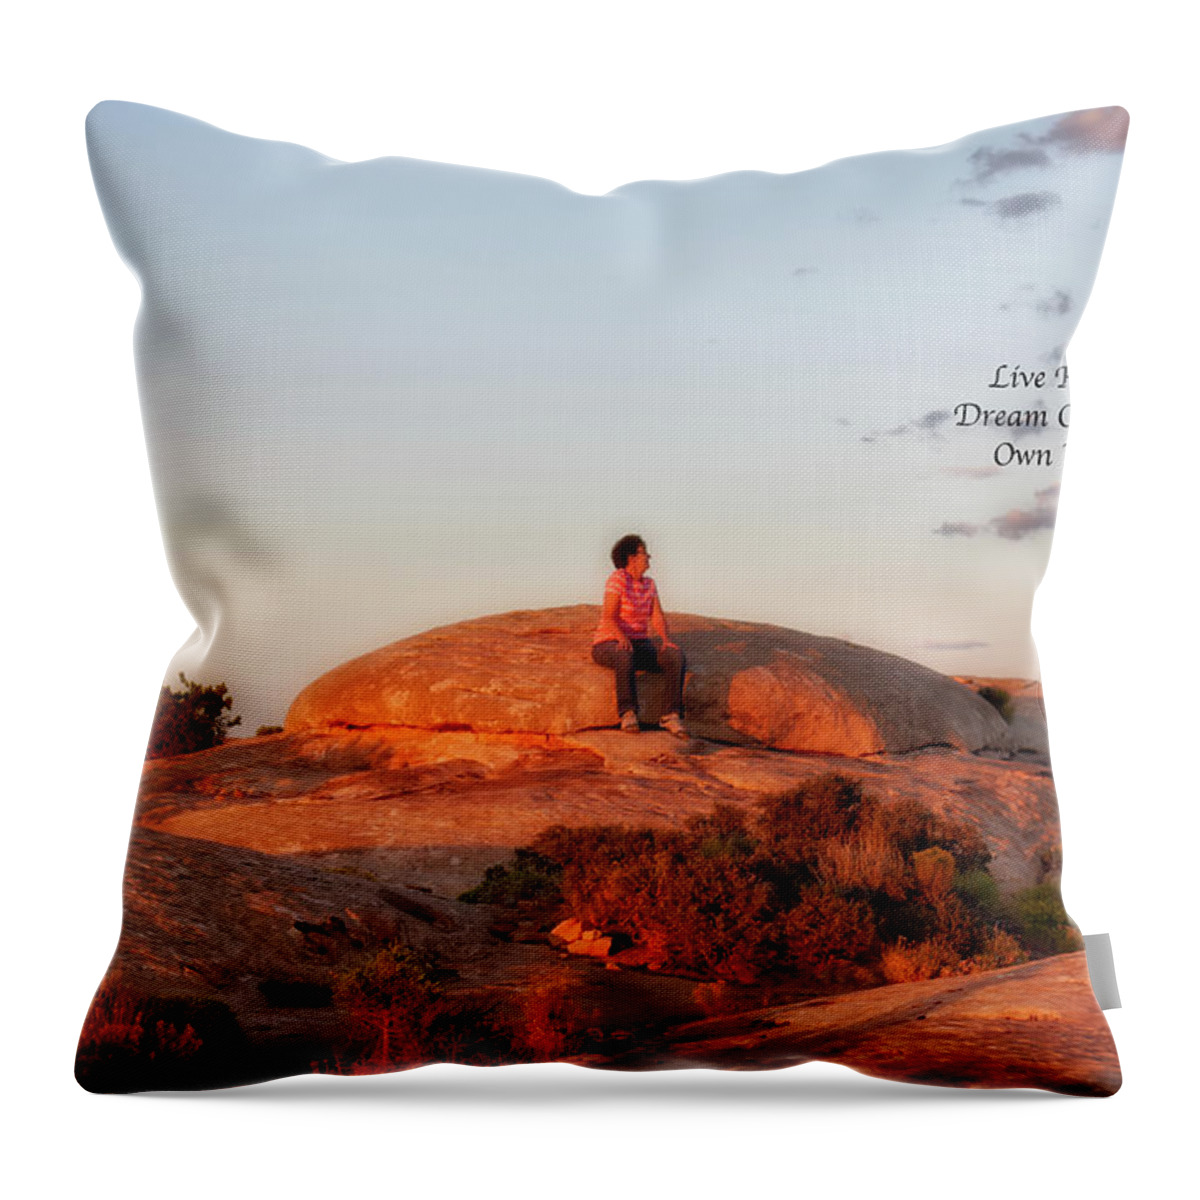 Southern Utah Sunset Throw Pillow featuring the photograph Live Dream Own Southern Utah Sunset Text by Thomas Woolworth